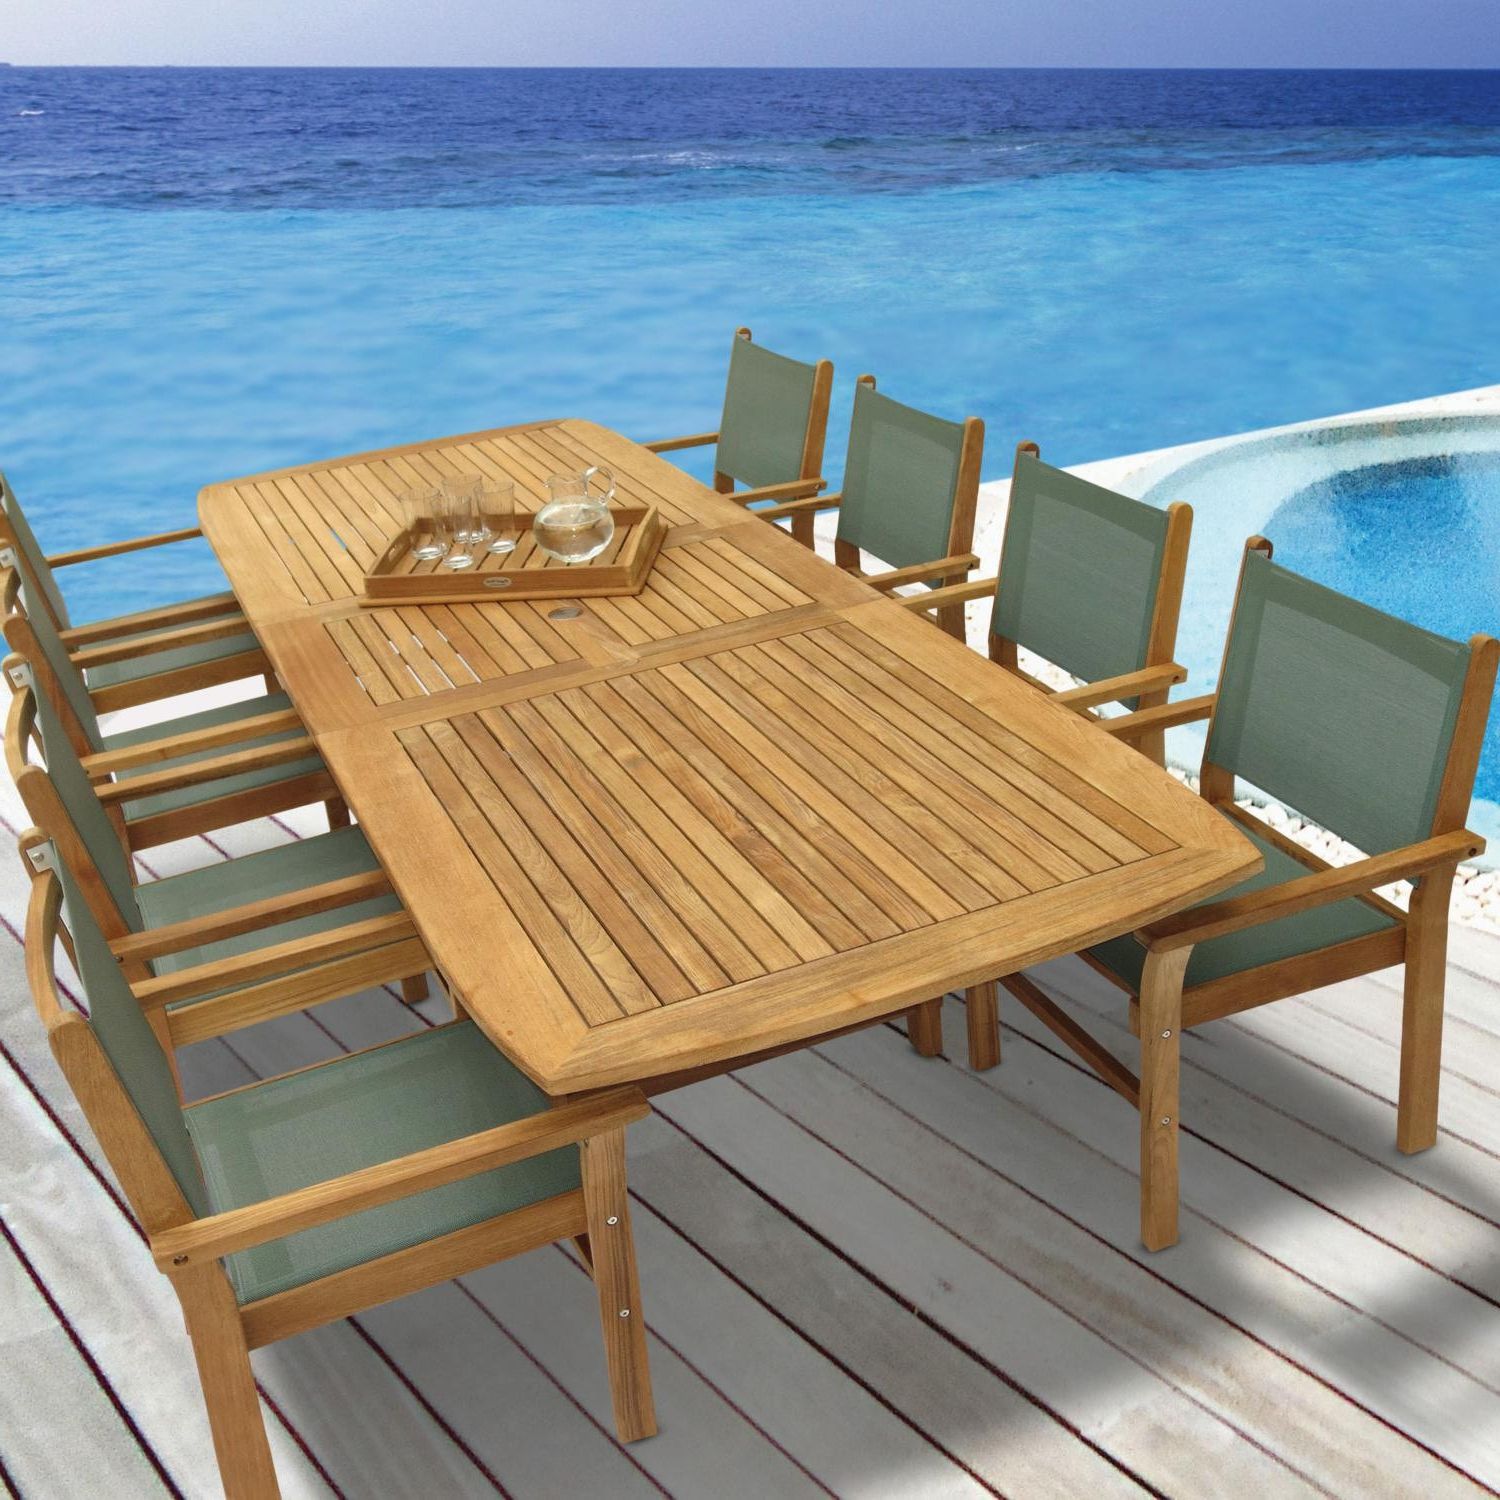 Captiva 9 Piece Teak Patio Dining Set W/ 96 X 44 Inch Rectangular With Regard To Latest 9 Piece Teak Outdoor Square Dining Sets (View 10 of 15)